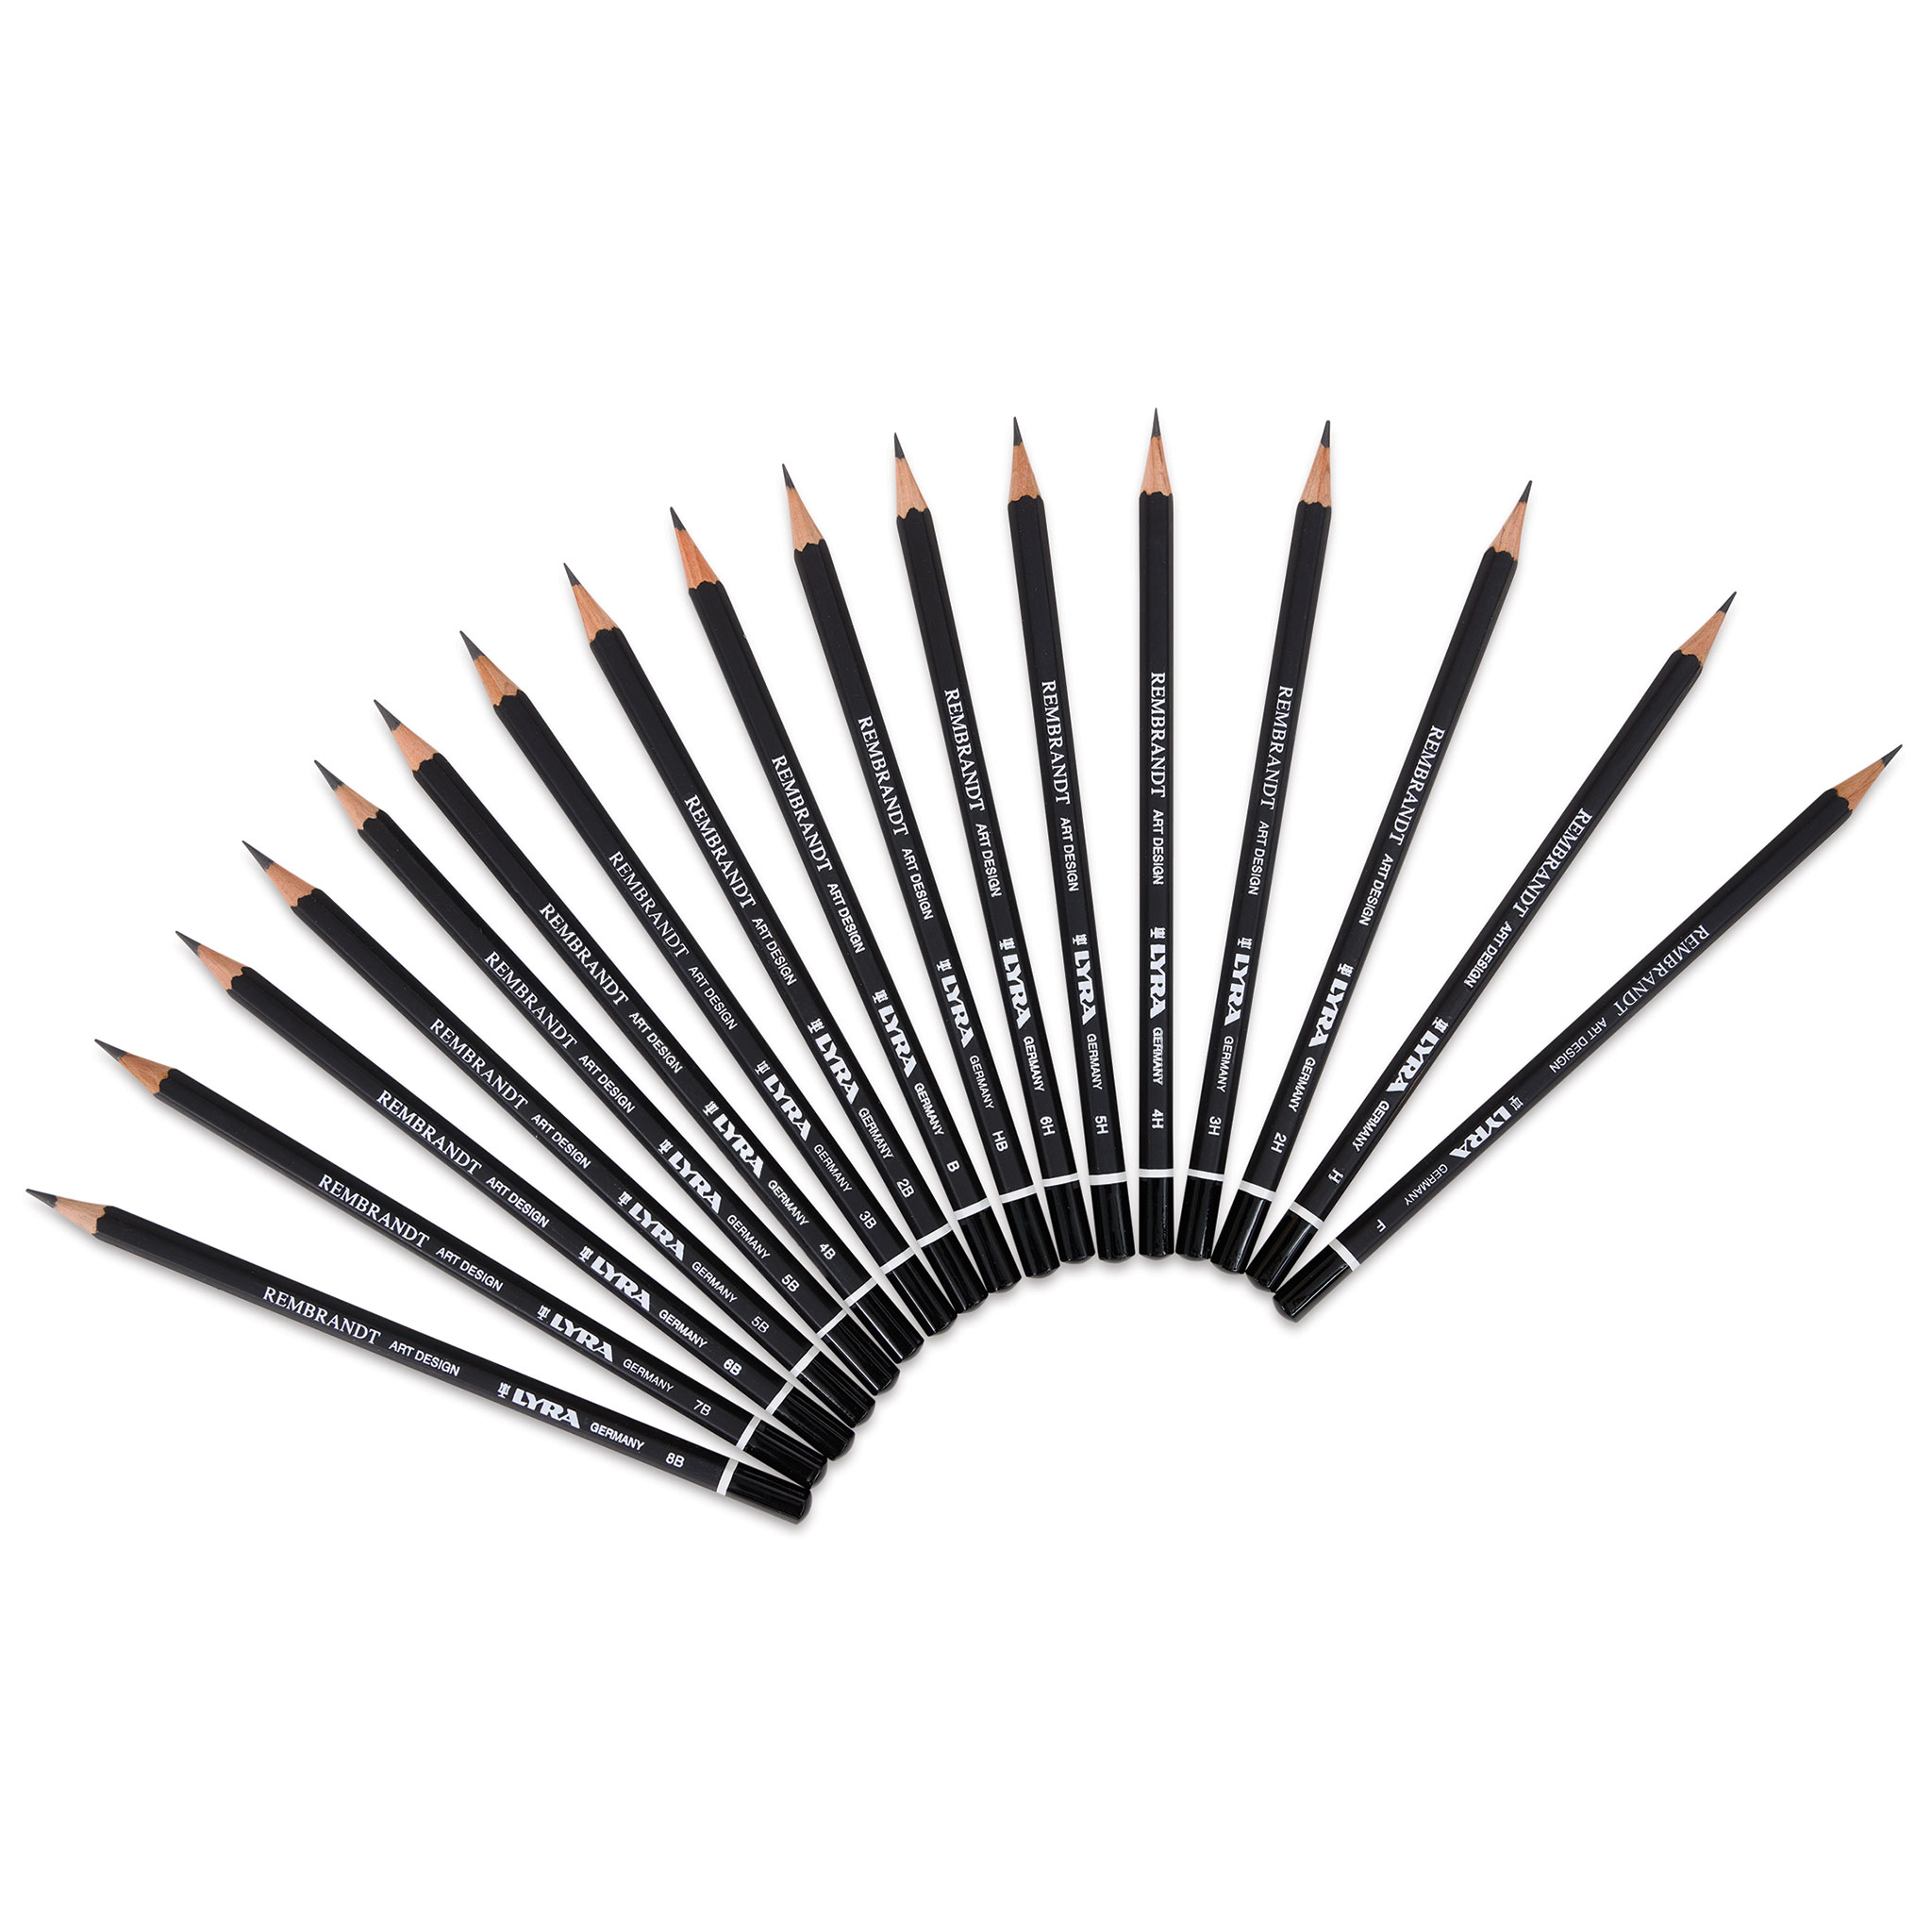 Castle Art Supplies 26 Piece Drawing and Sketching Art Set: Perfect for  Beginners, Kids or Any Aspiring Artist - Includes Graphite Pencils and  Sticks